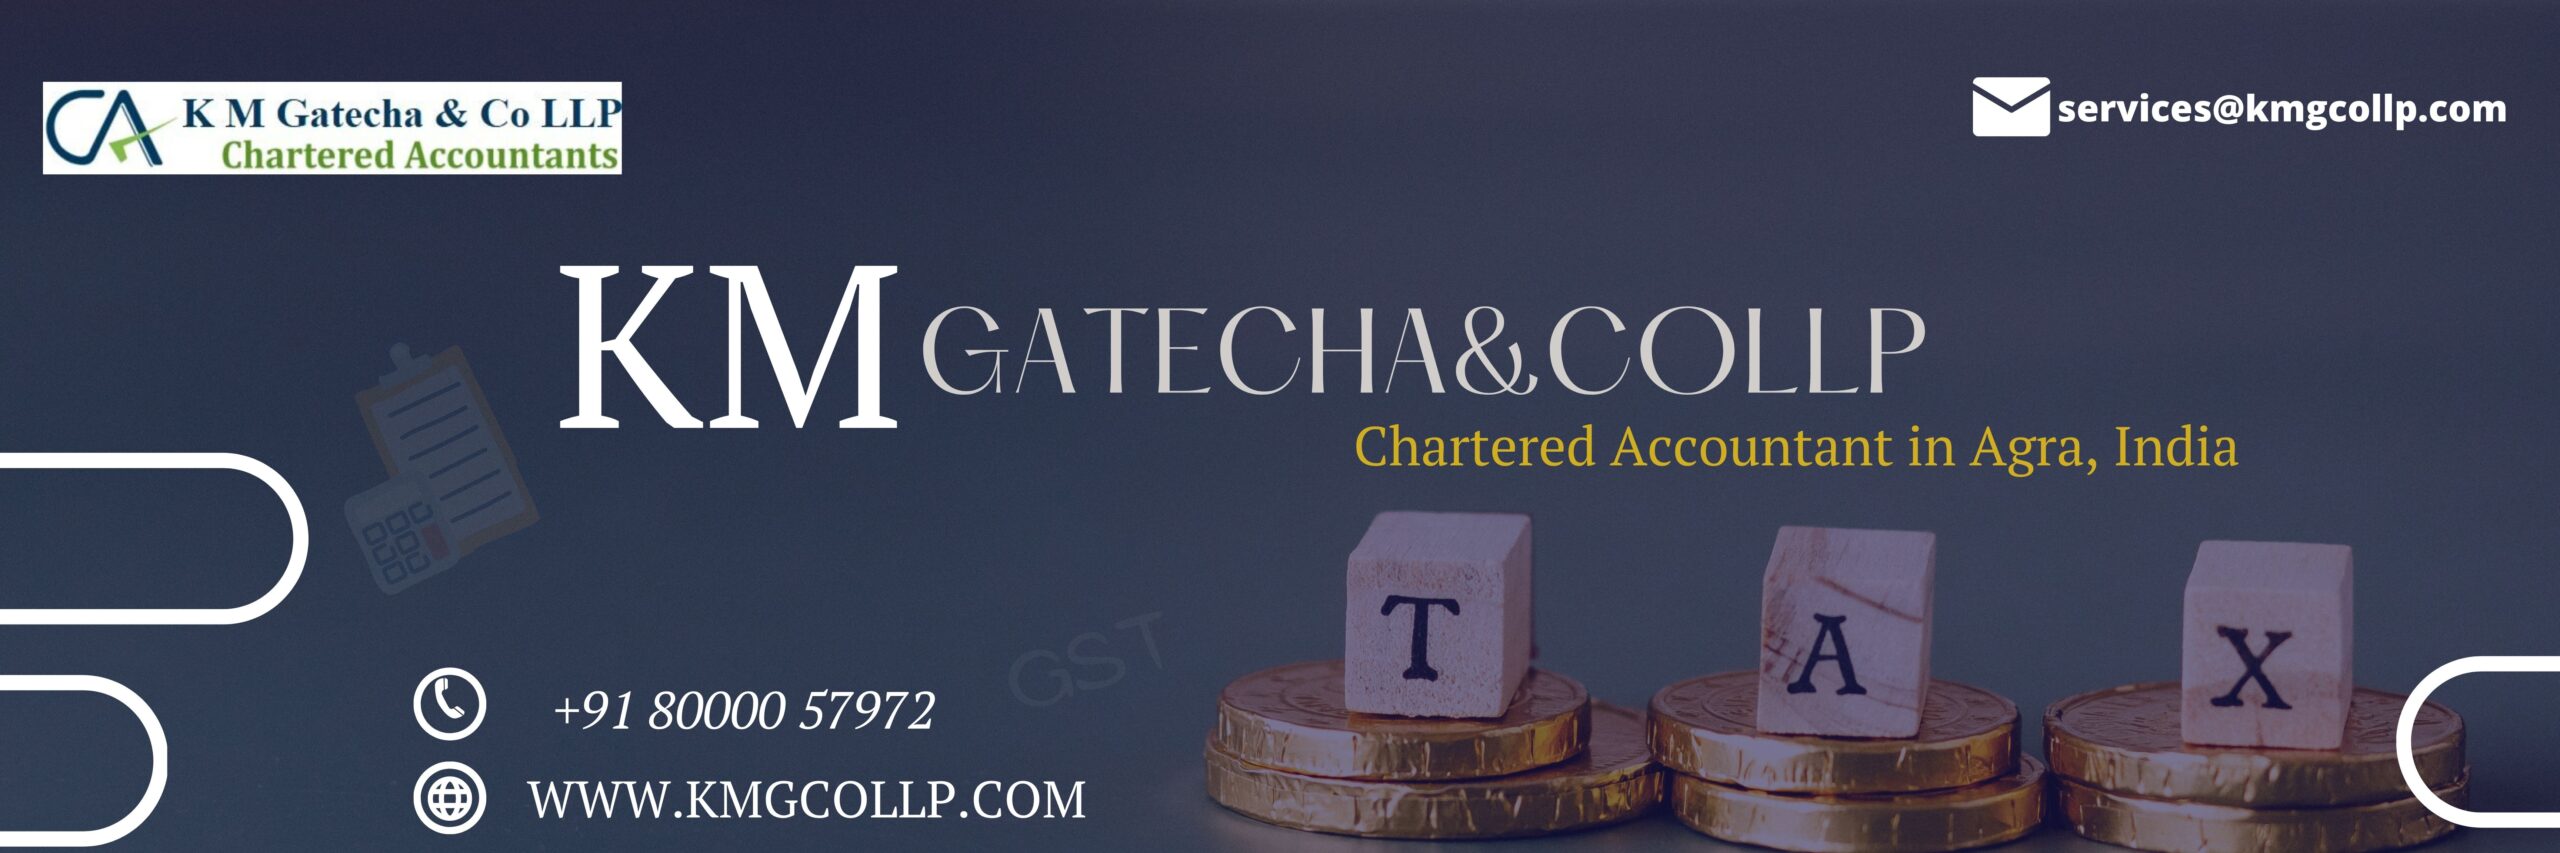 ca chartered accountant in agra, india